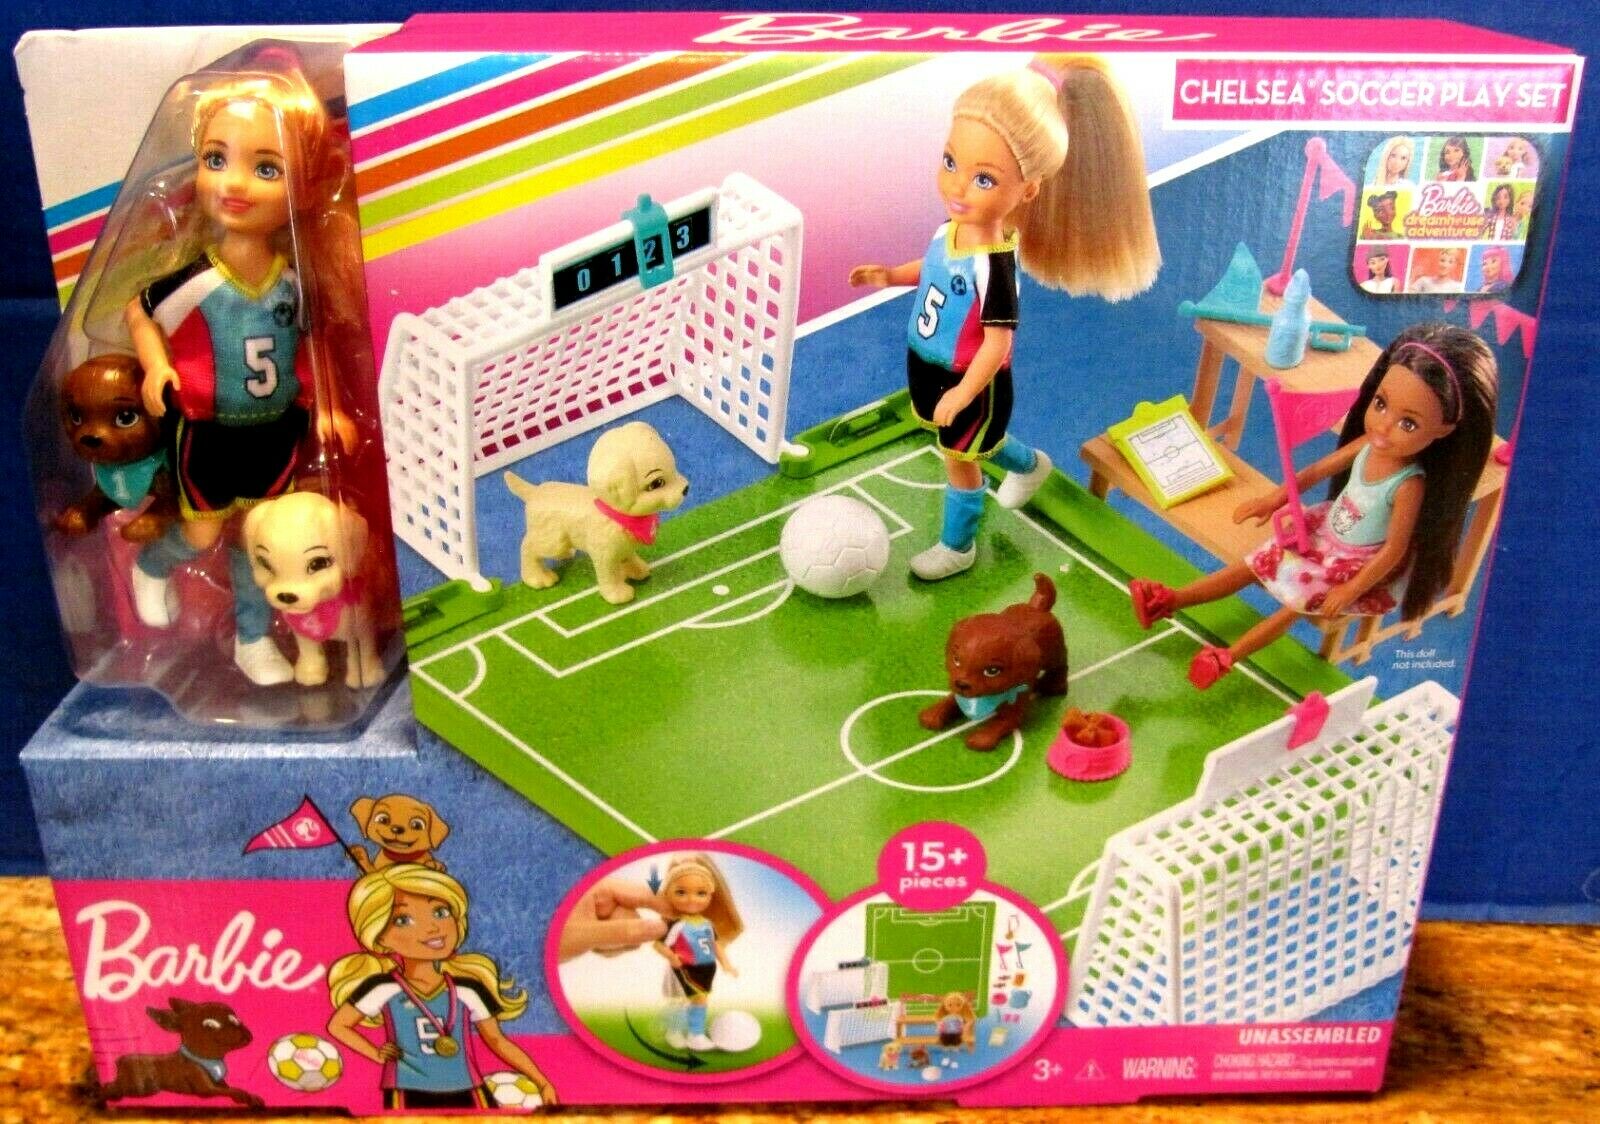 BARBIE CHELSEA SOCCER PLAY SET 15+pc. NEW/MINT/USA FREE SHIPPING